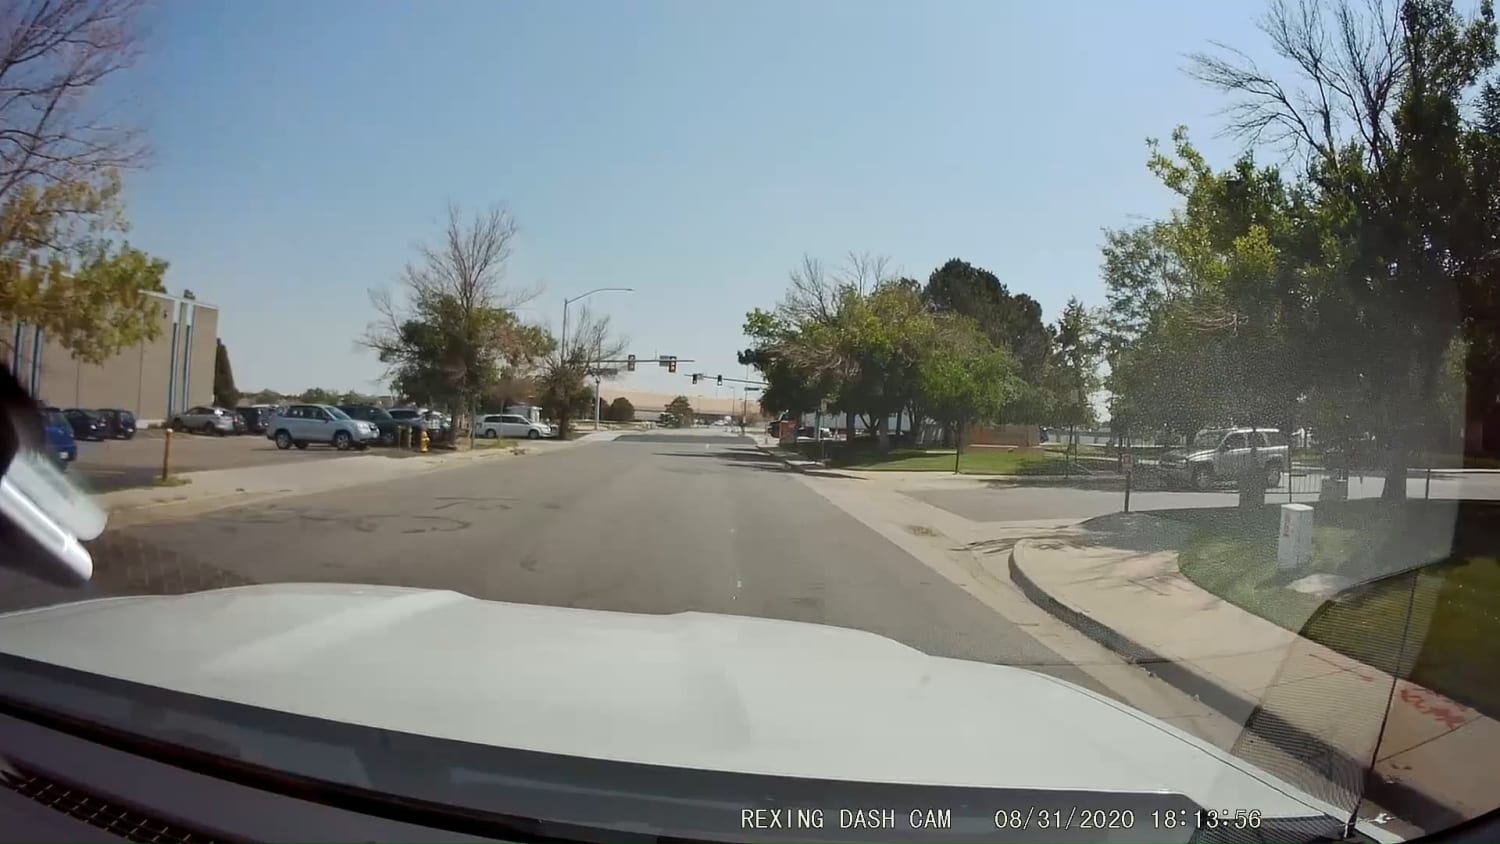 After 4 months of owning my dashcam, I caught an idiot in the wild.